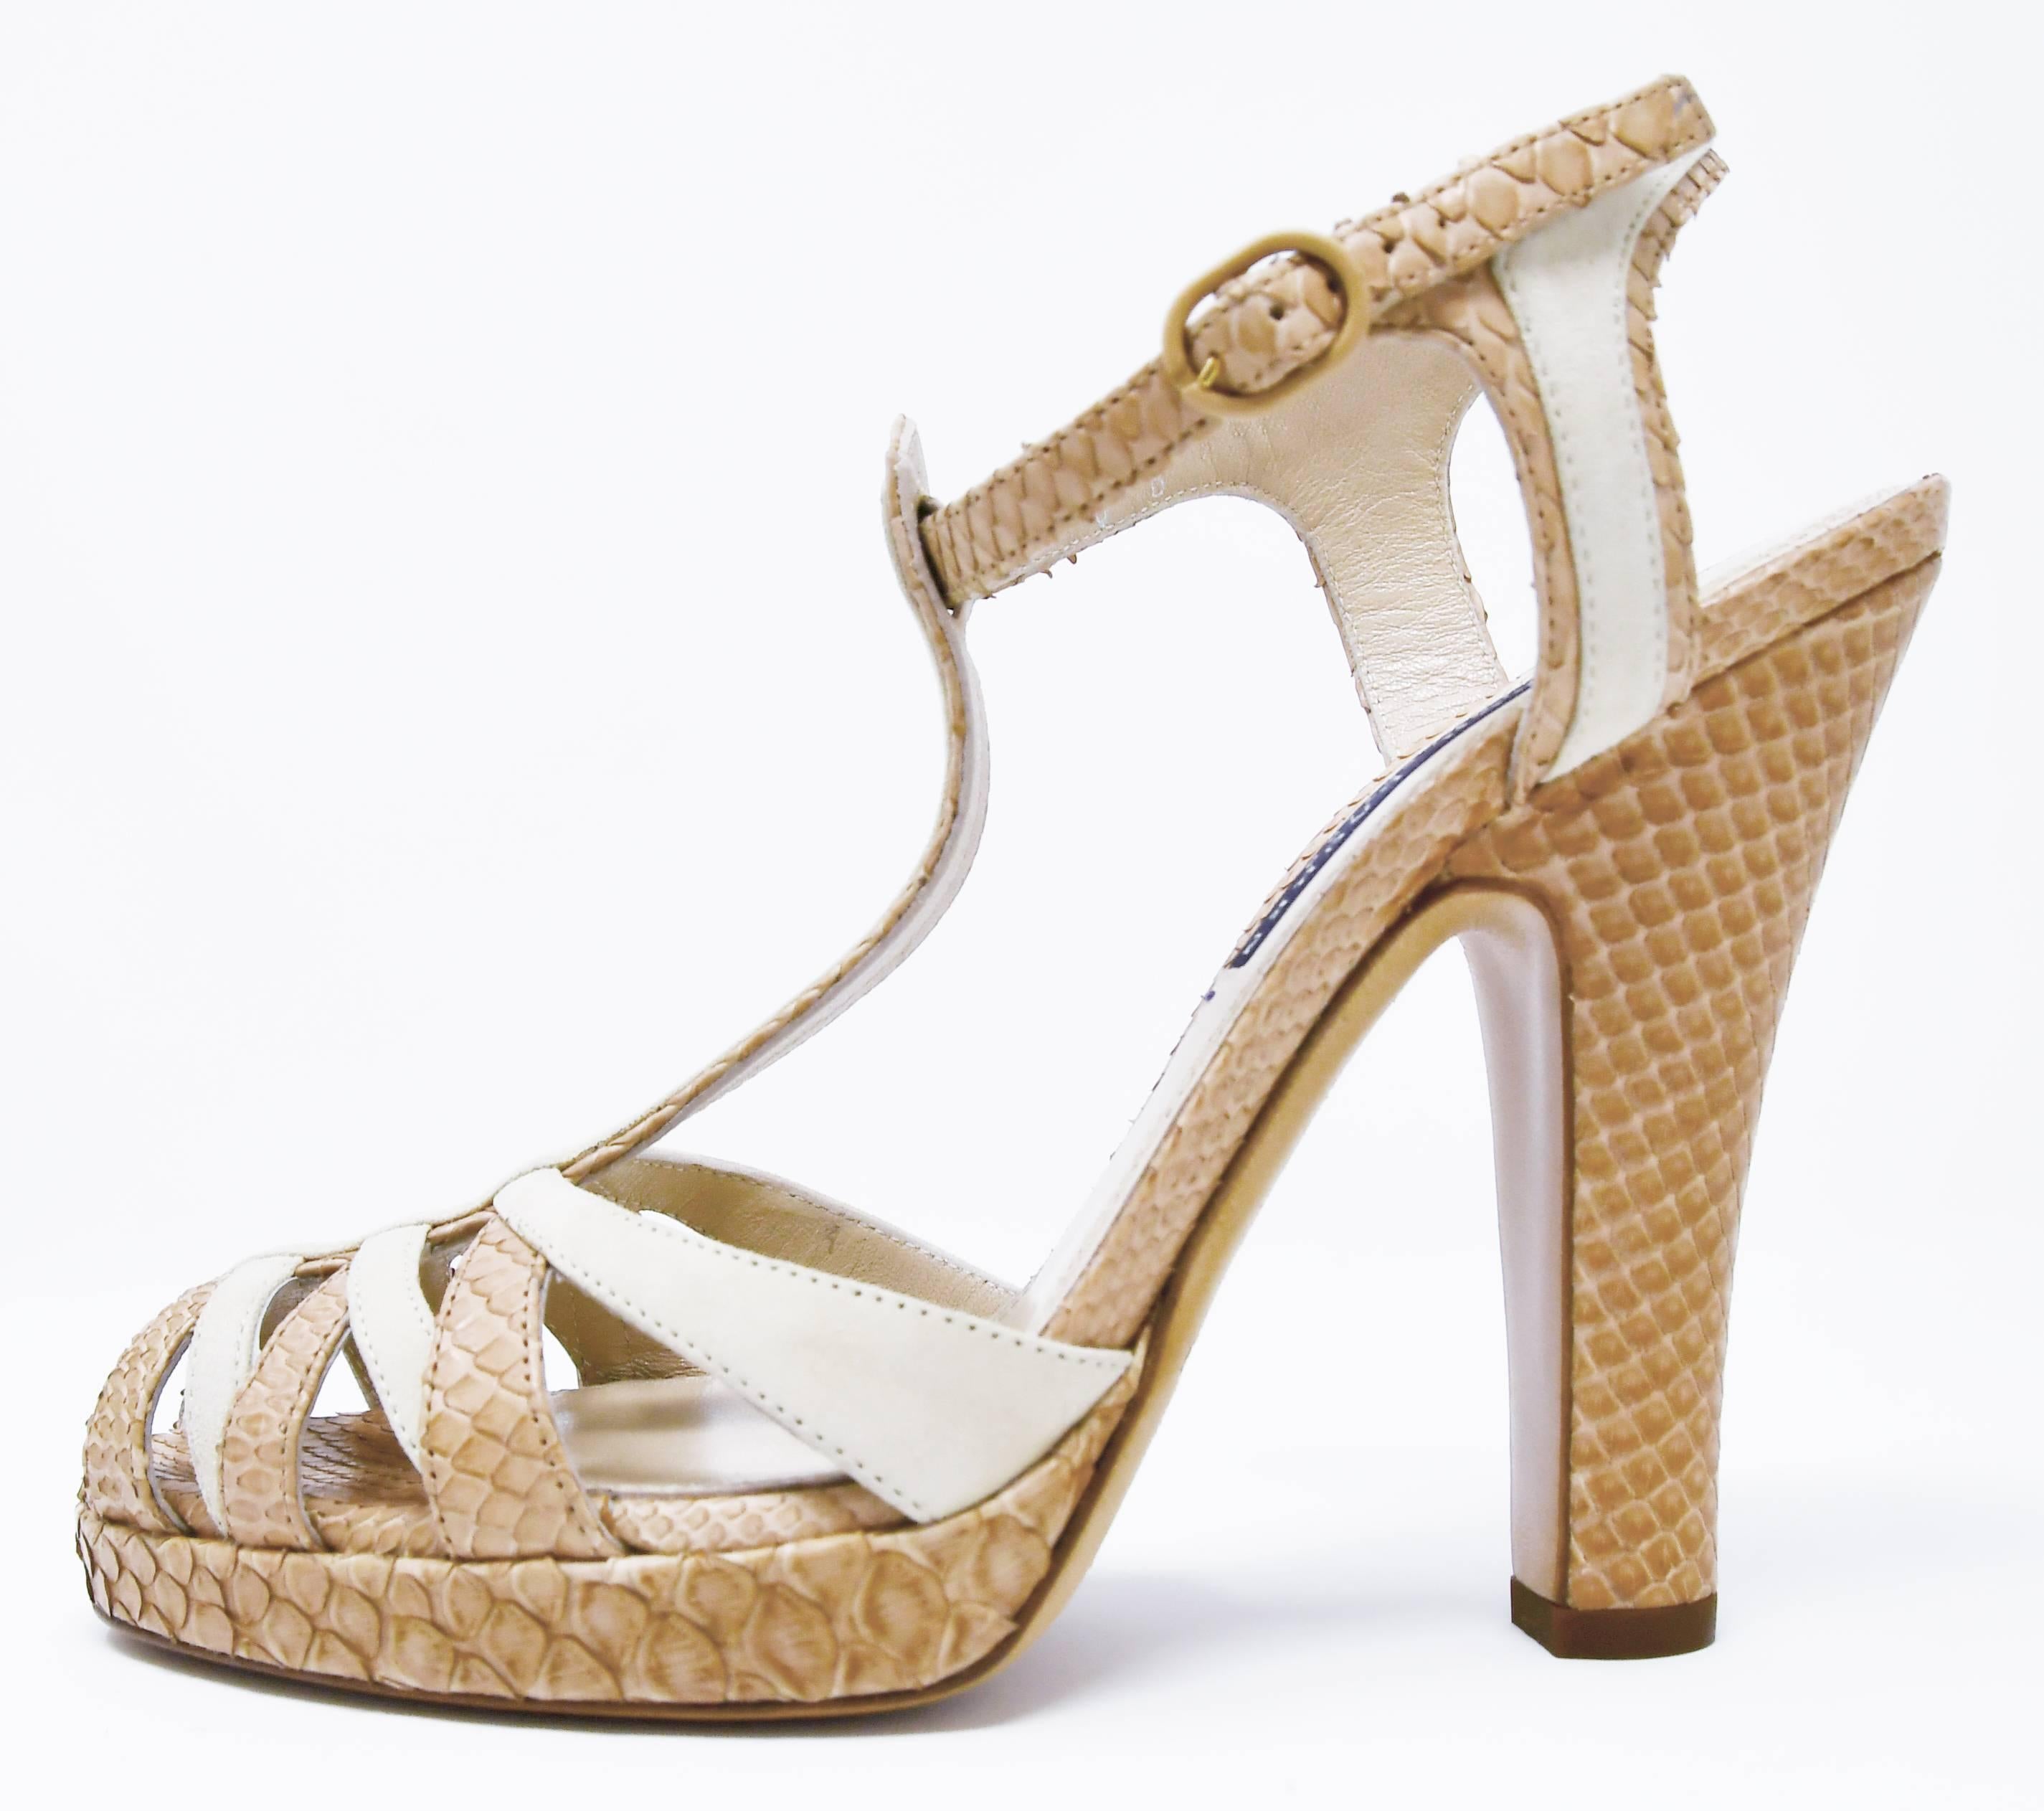 A gorgeous and rare Ralph Lauren Collection Suede/Python, Strappy Sandal for Resort/Summer.  The shoe is constructed of nude python and suede with off-white leather accent.  This is a very versatile look and can be worn with anything.  A beautiful